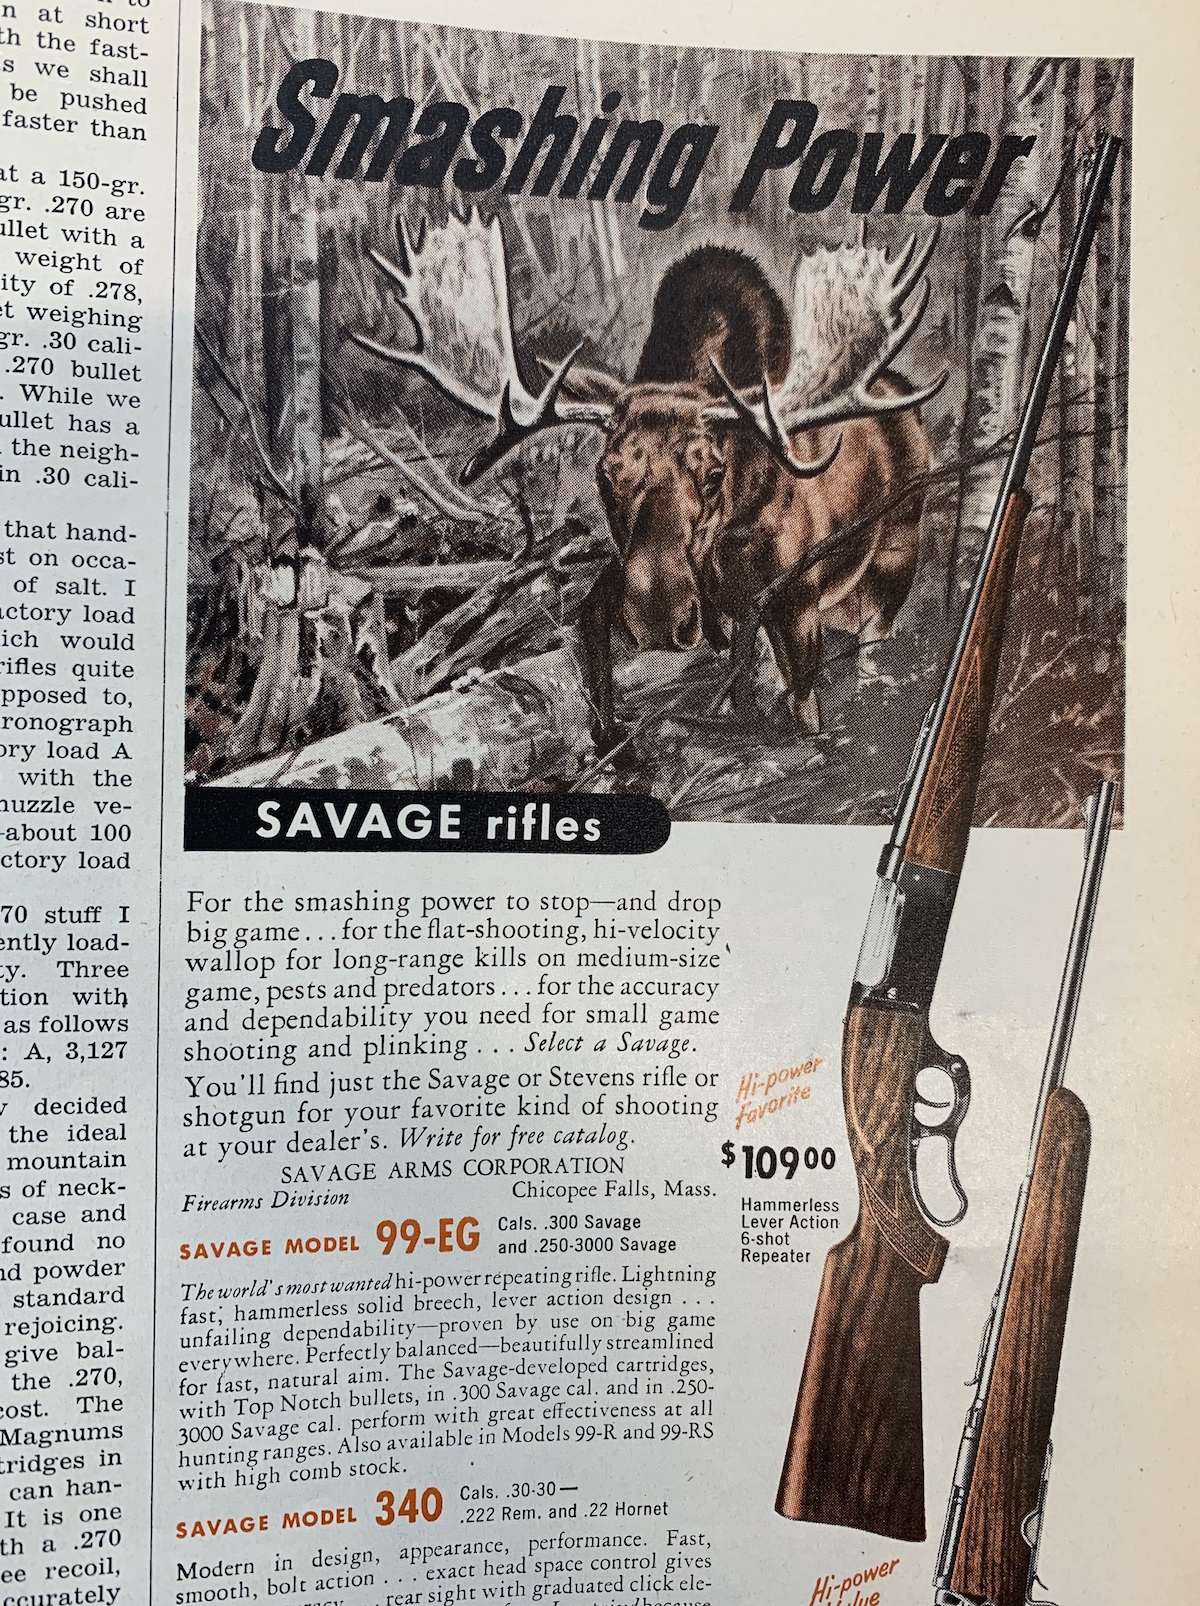 The Savage Model 99 was one of America's most-popular lever guns. Ad from the November, 1954 issue of Outdoor Life.